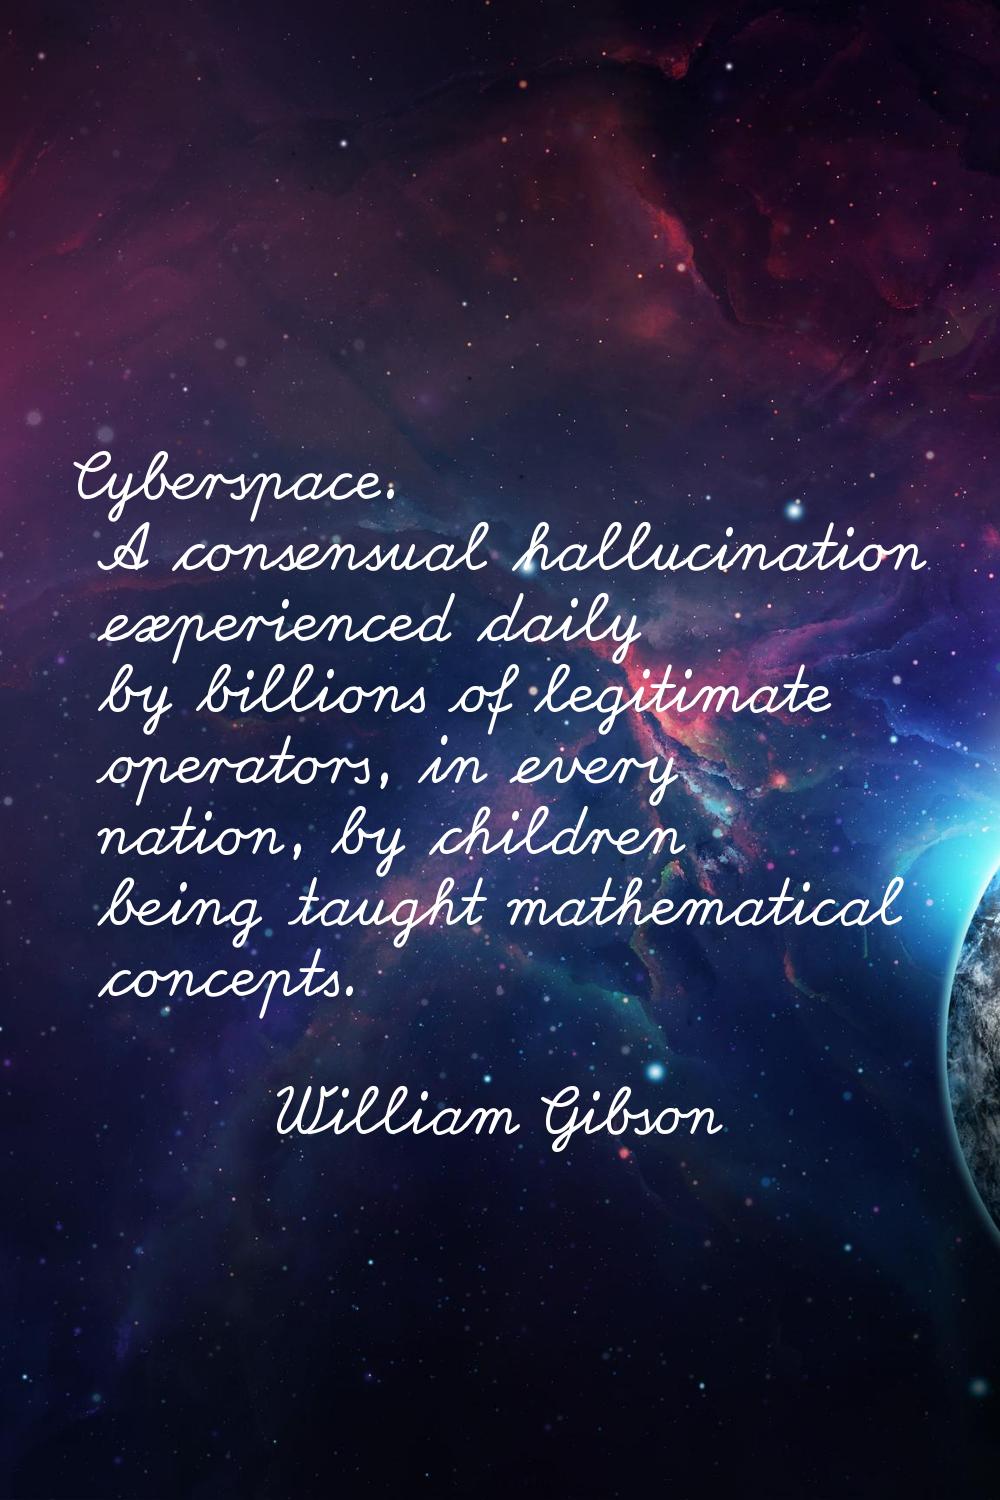 Cyberspace. A consensual hallucination experienced daily by billions of legitimate operators, in ev